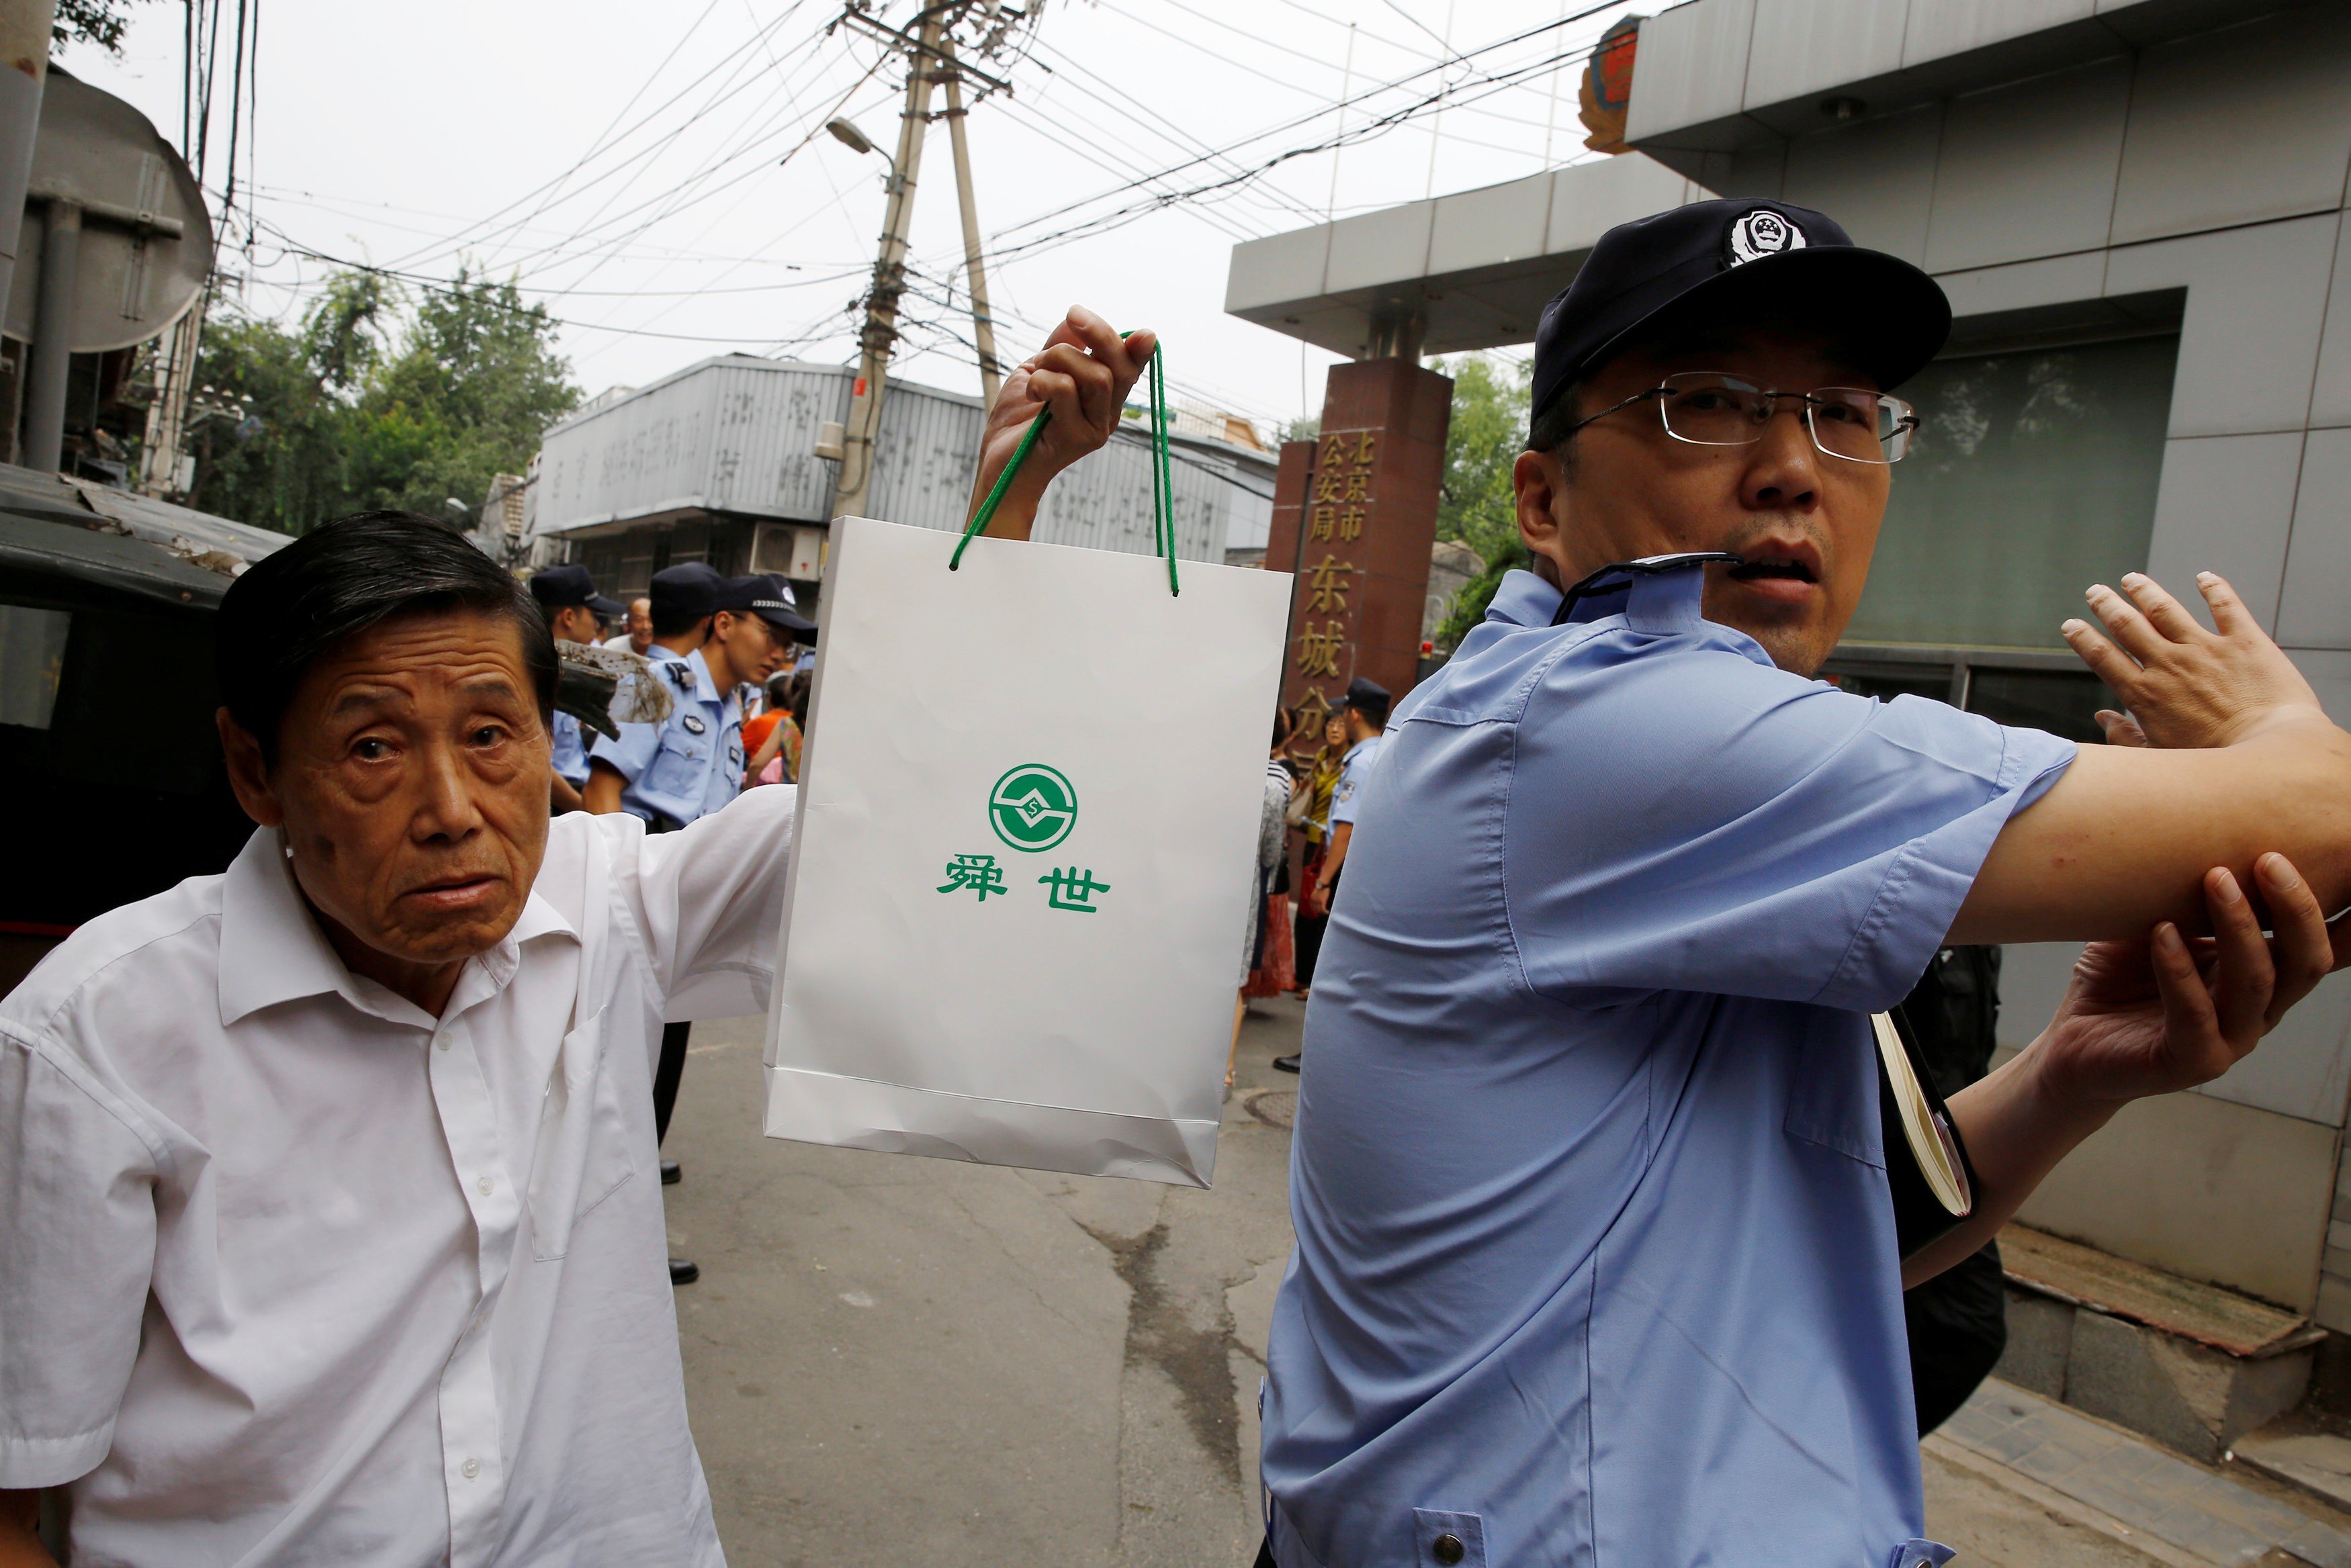 A man in Beijing holds up a bag with a logo of a P2P lender as he attends a protest over losses incurred in peer-to-peer (P2P) investment schemes. Photo: Reuters